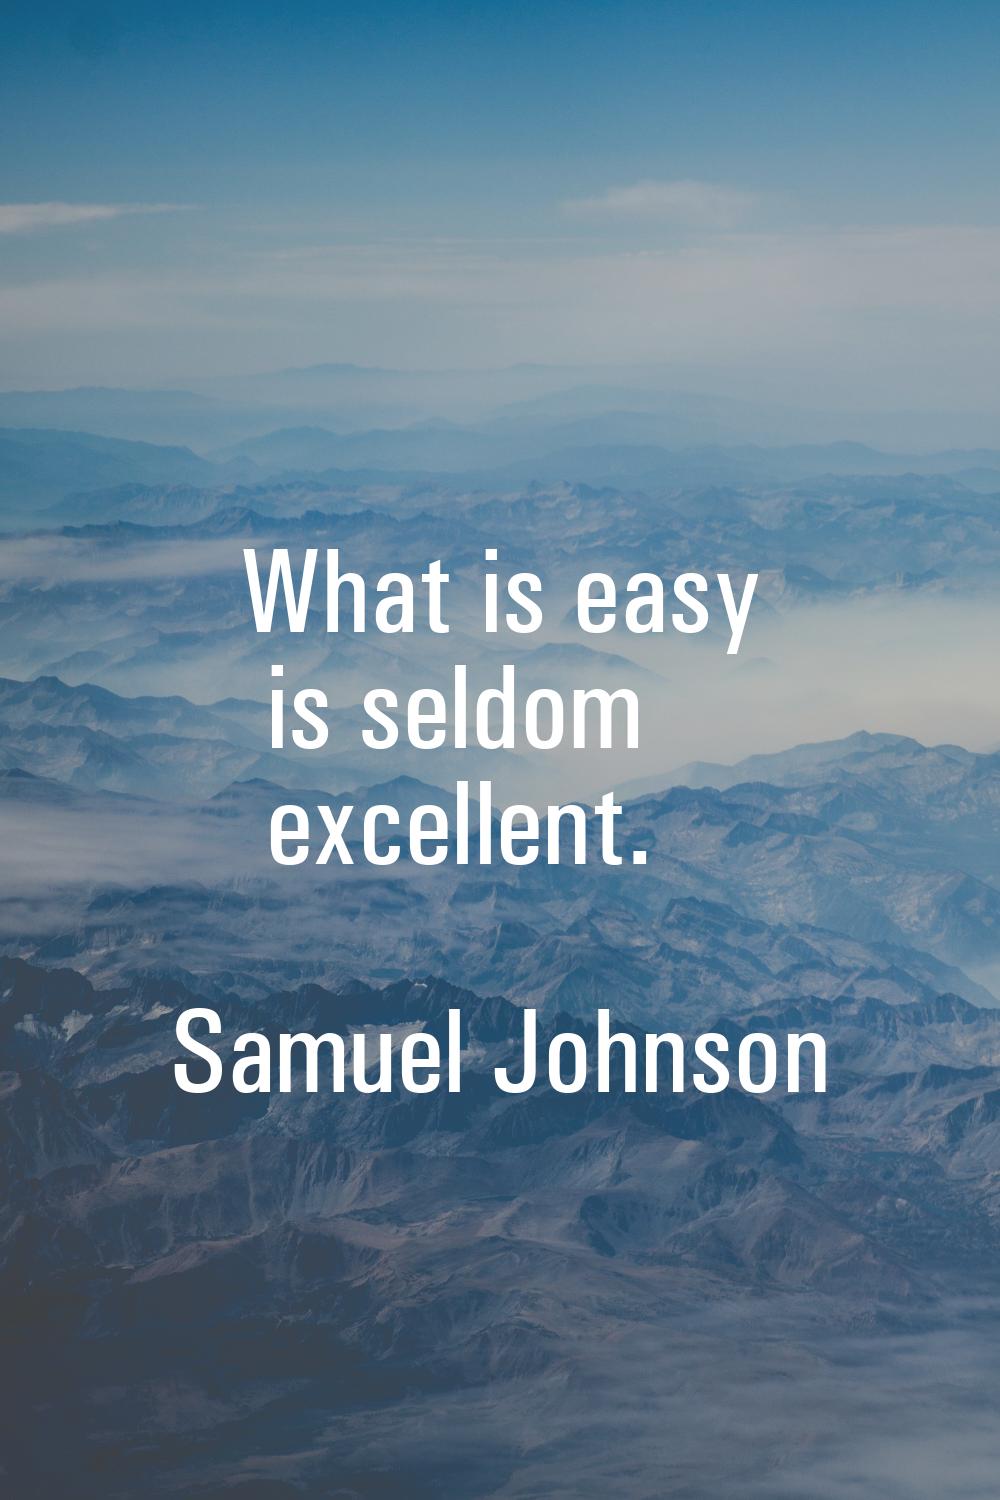 What is easy is seldom excellent.